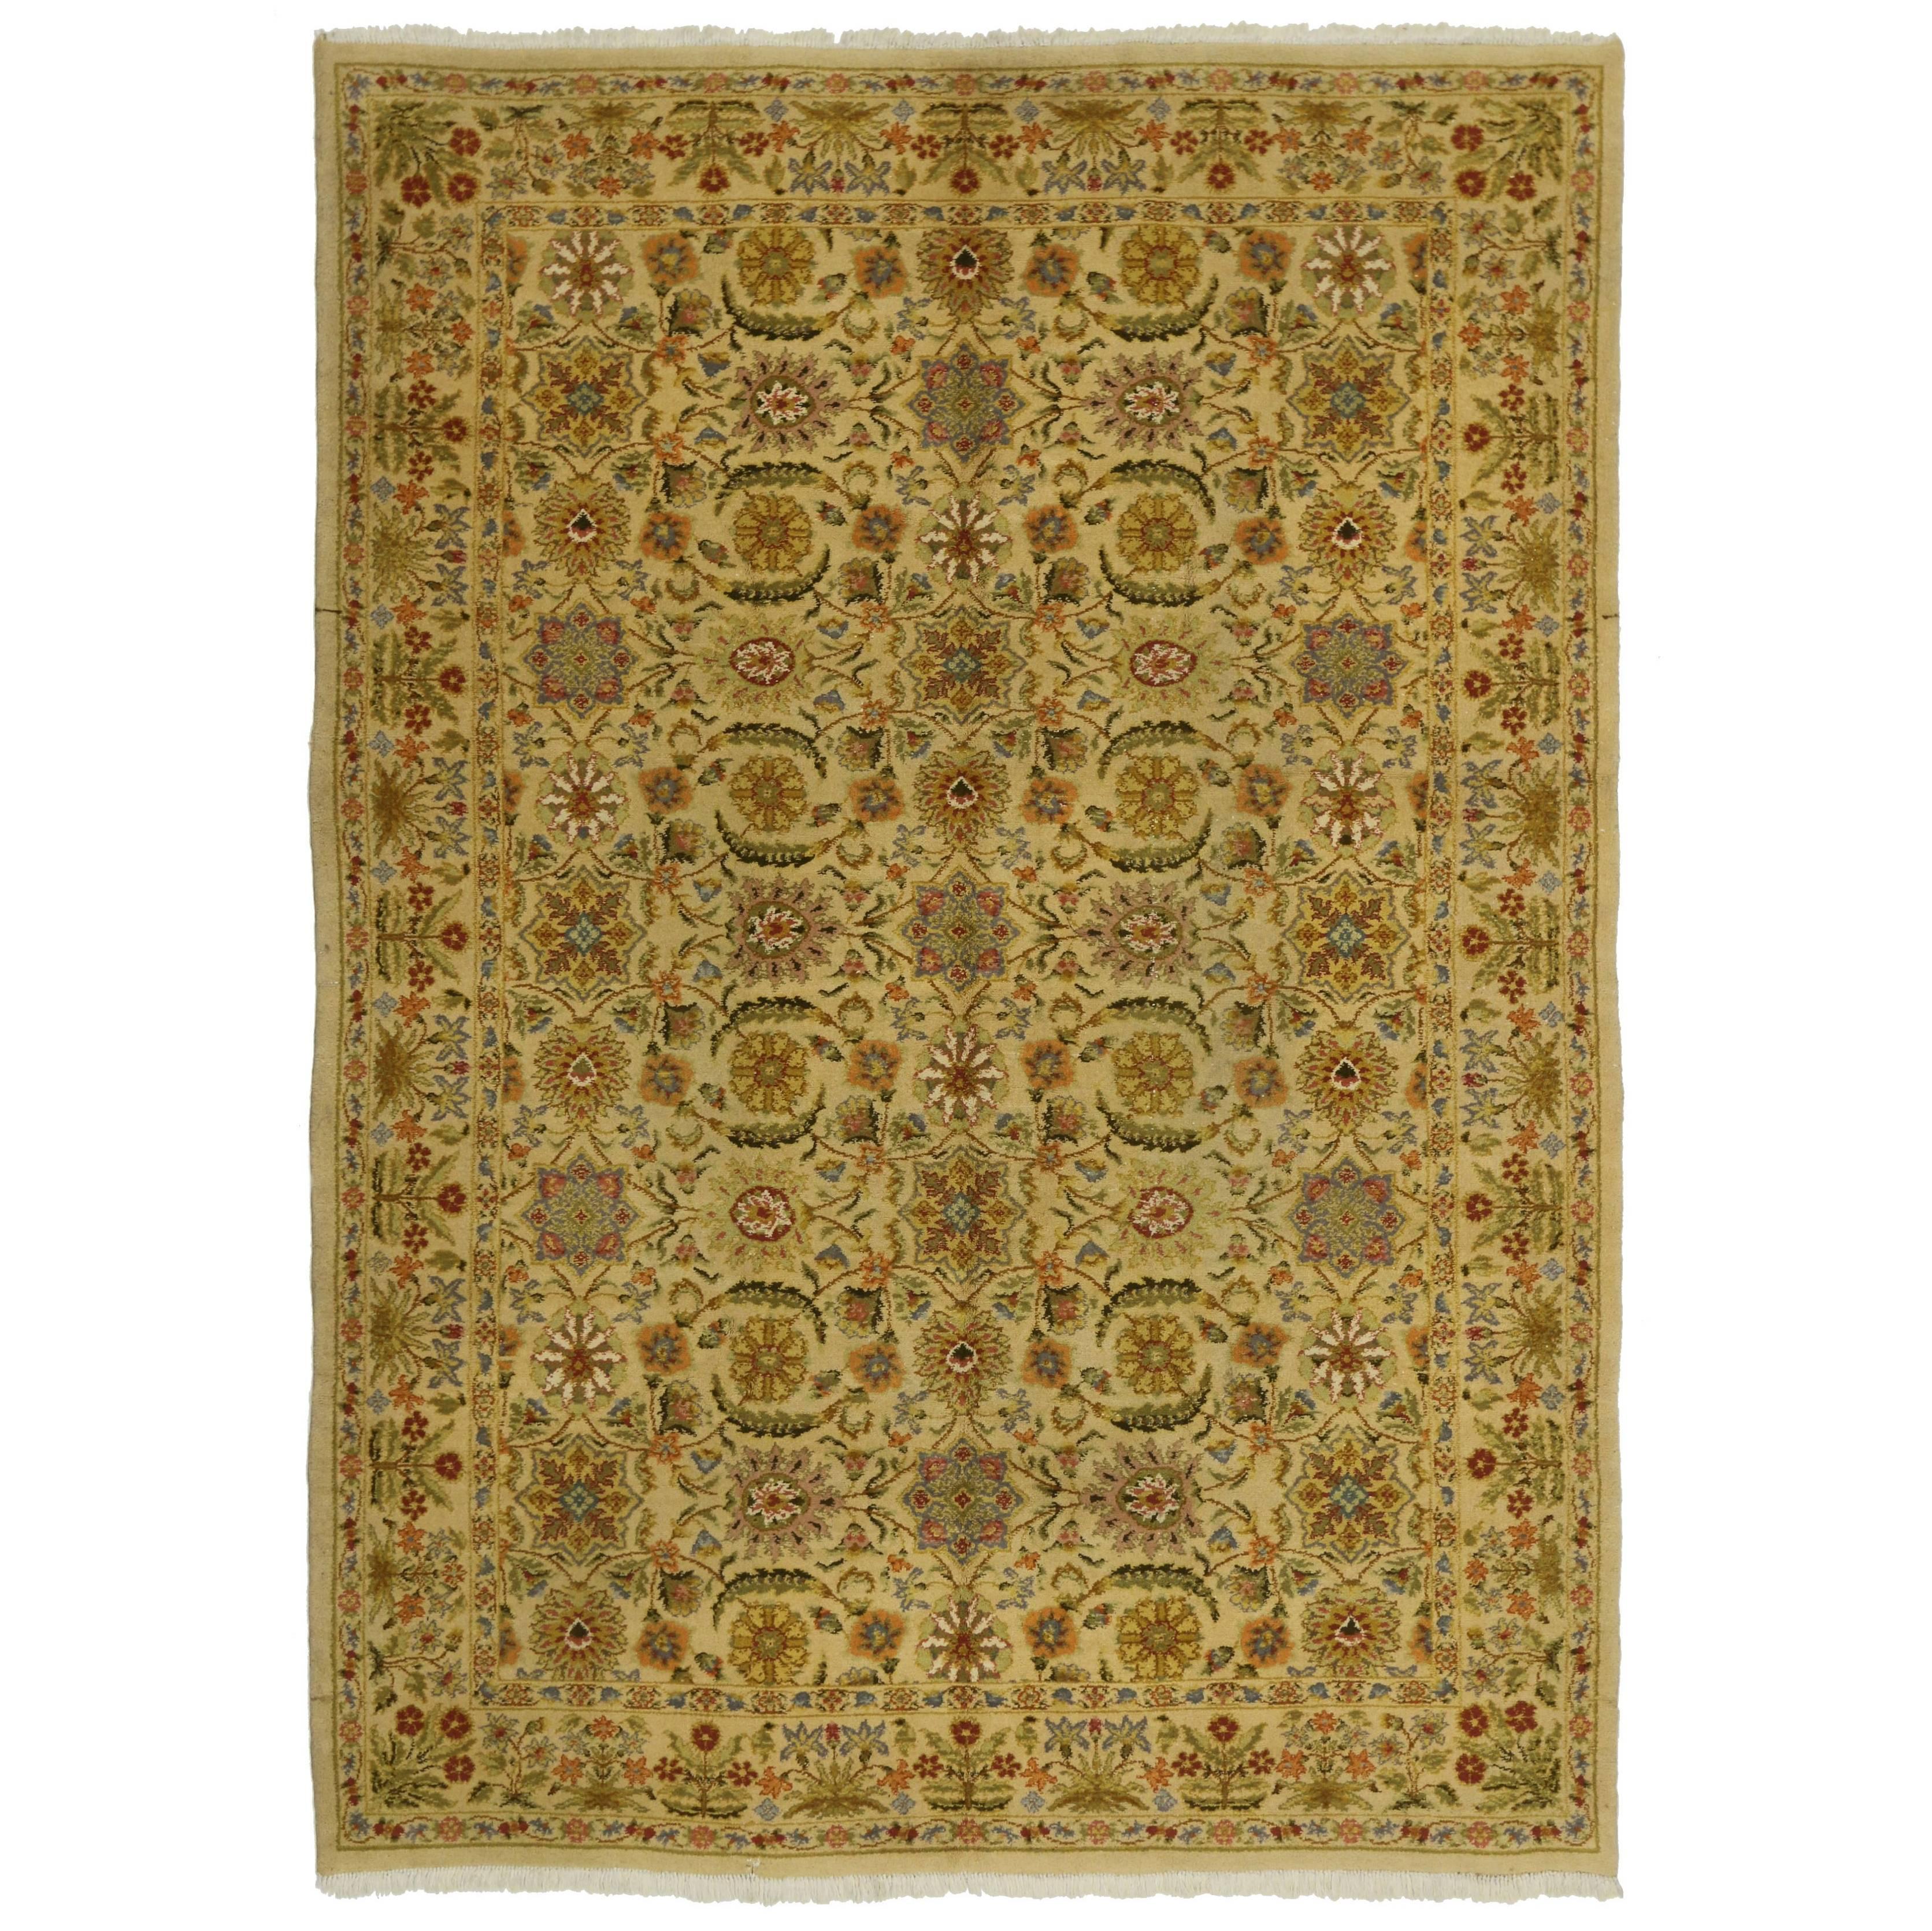 Vintage Spanish Golden Rug with Modern Traditional Style